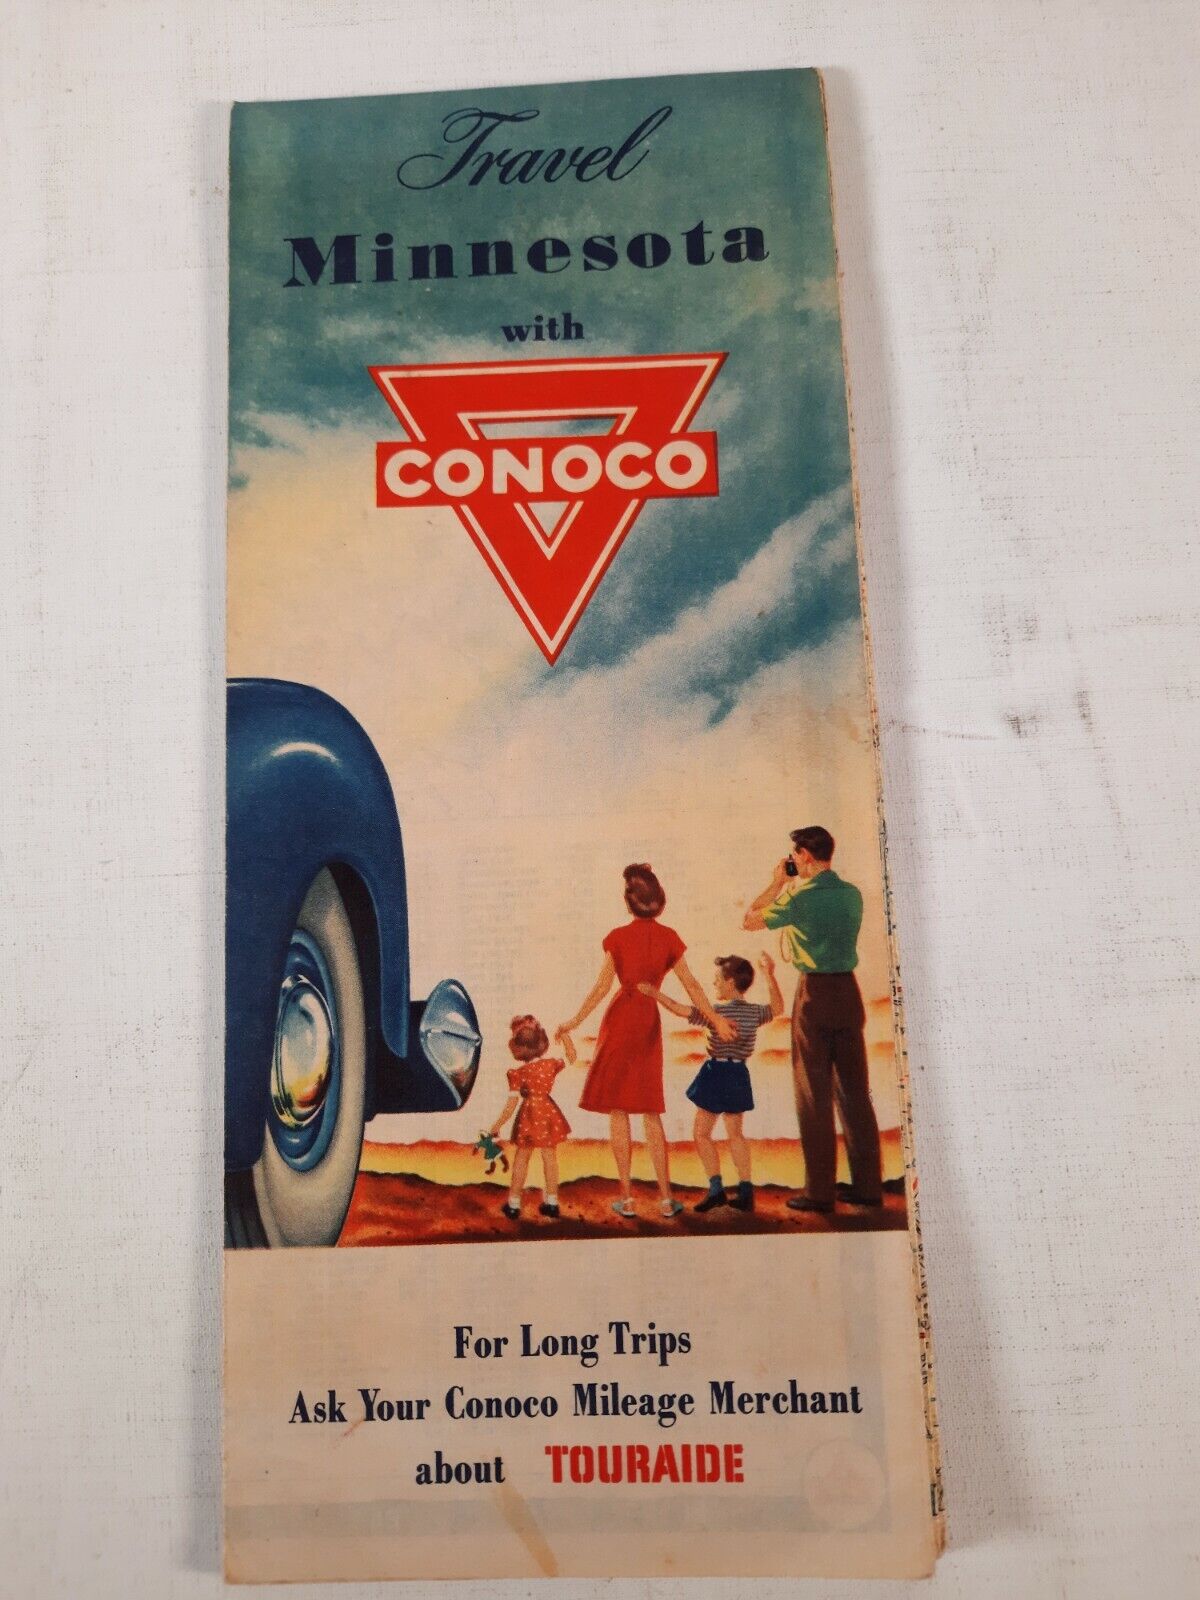 Vintage travel Minnesota with Conoco road map